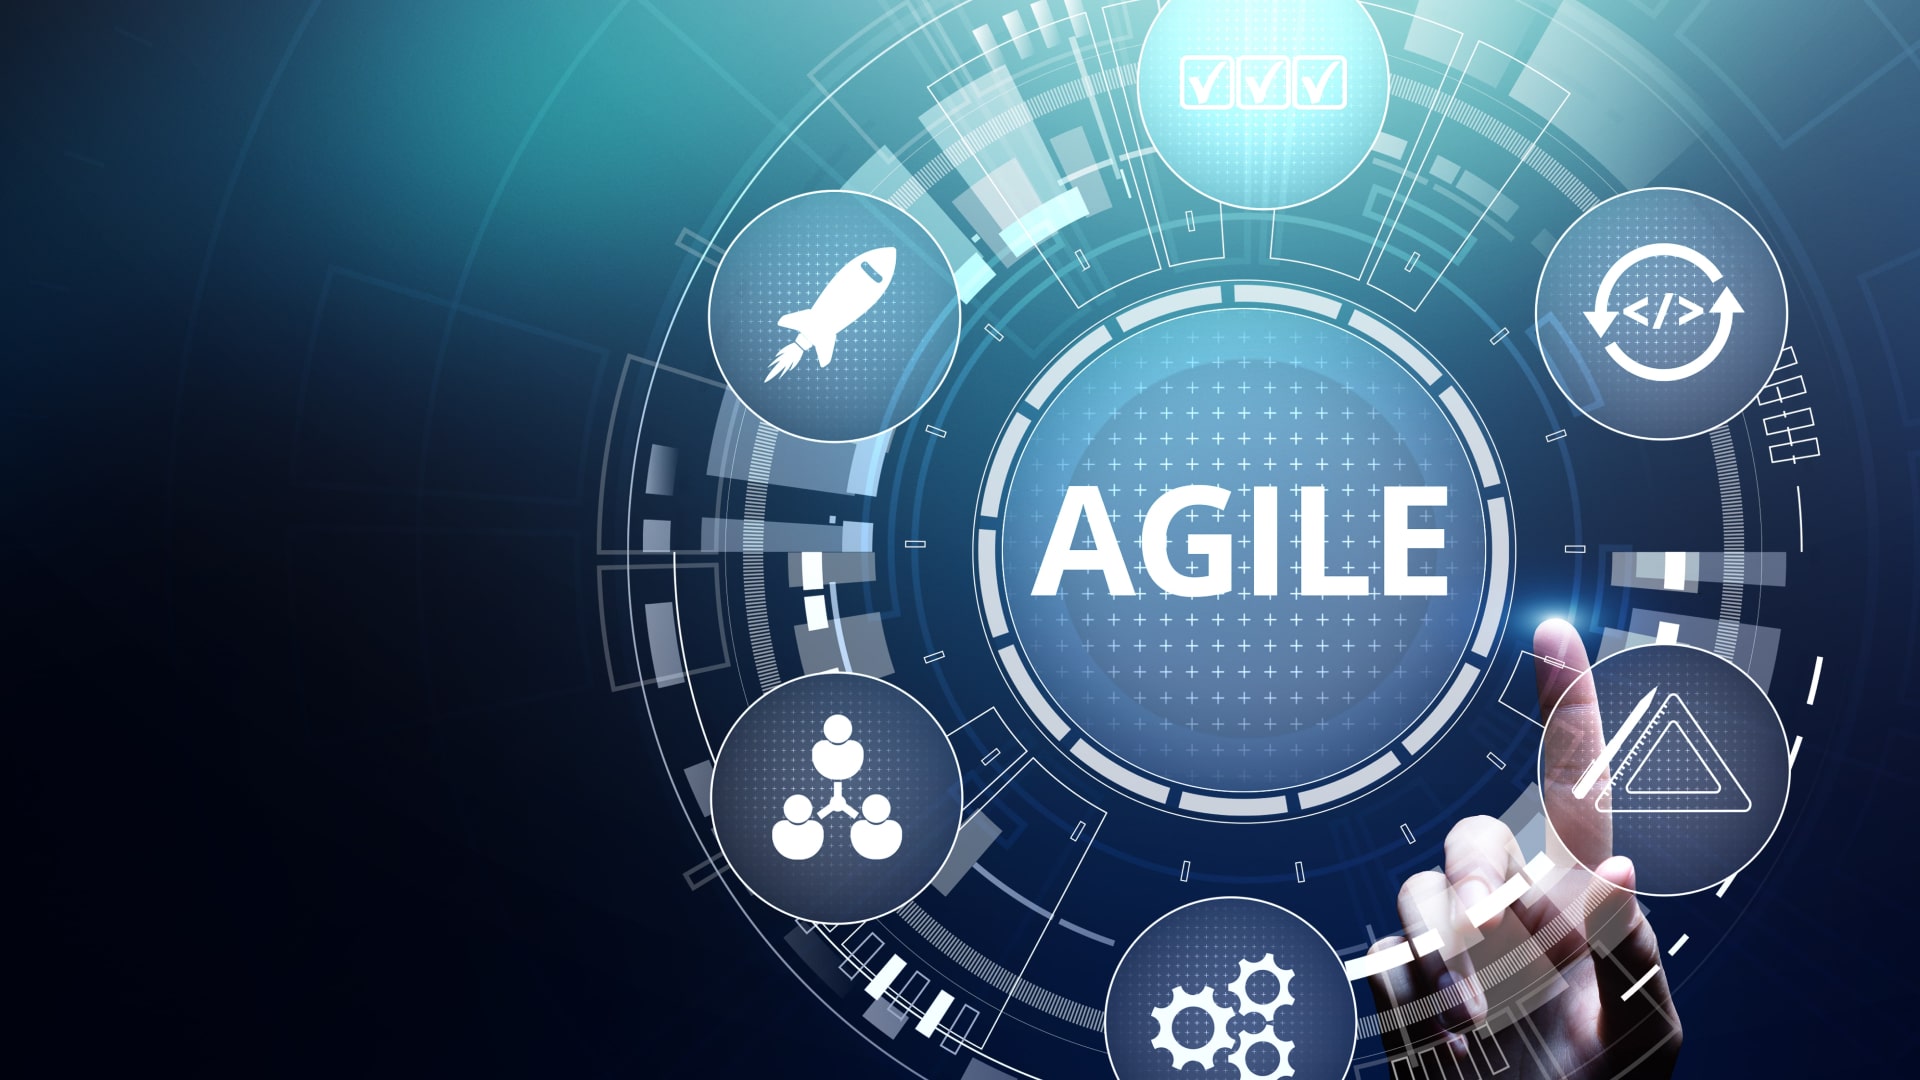 How to apply Agile principles in mentoring Project Managers